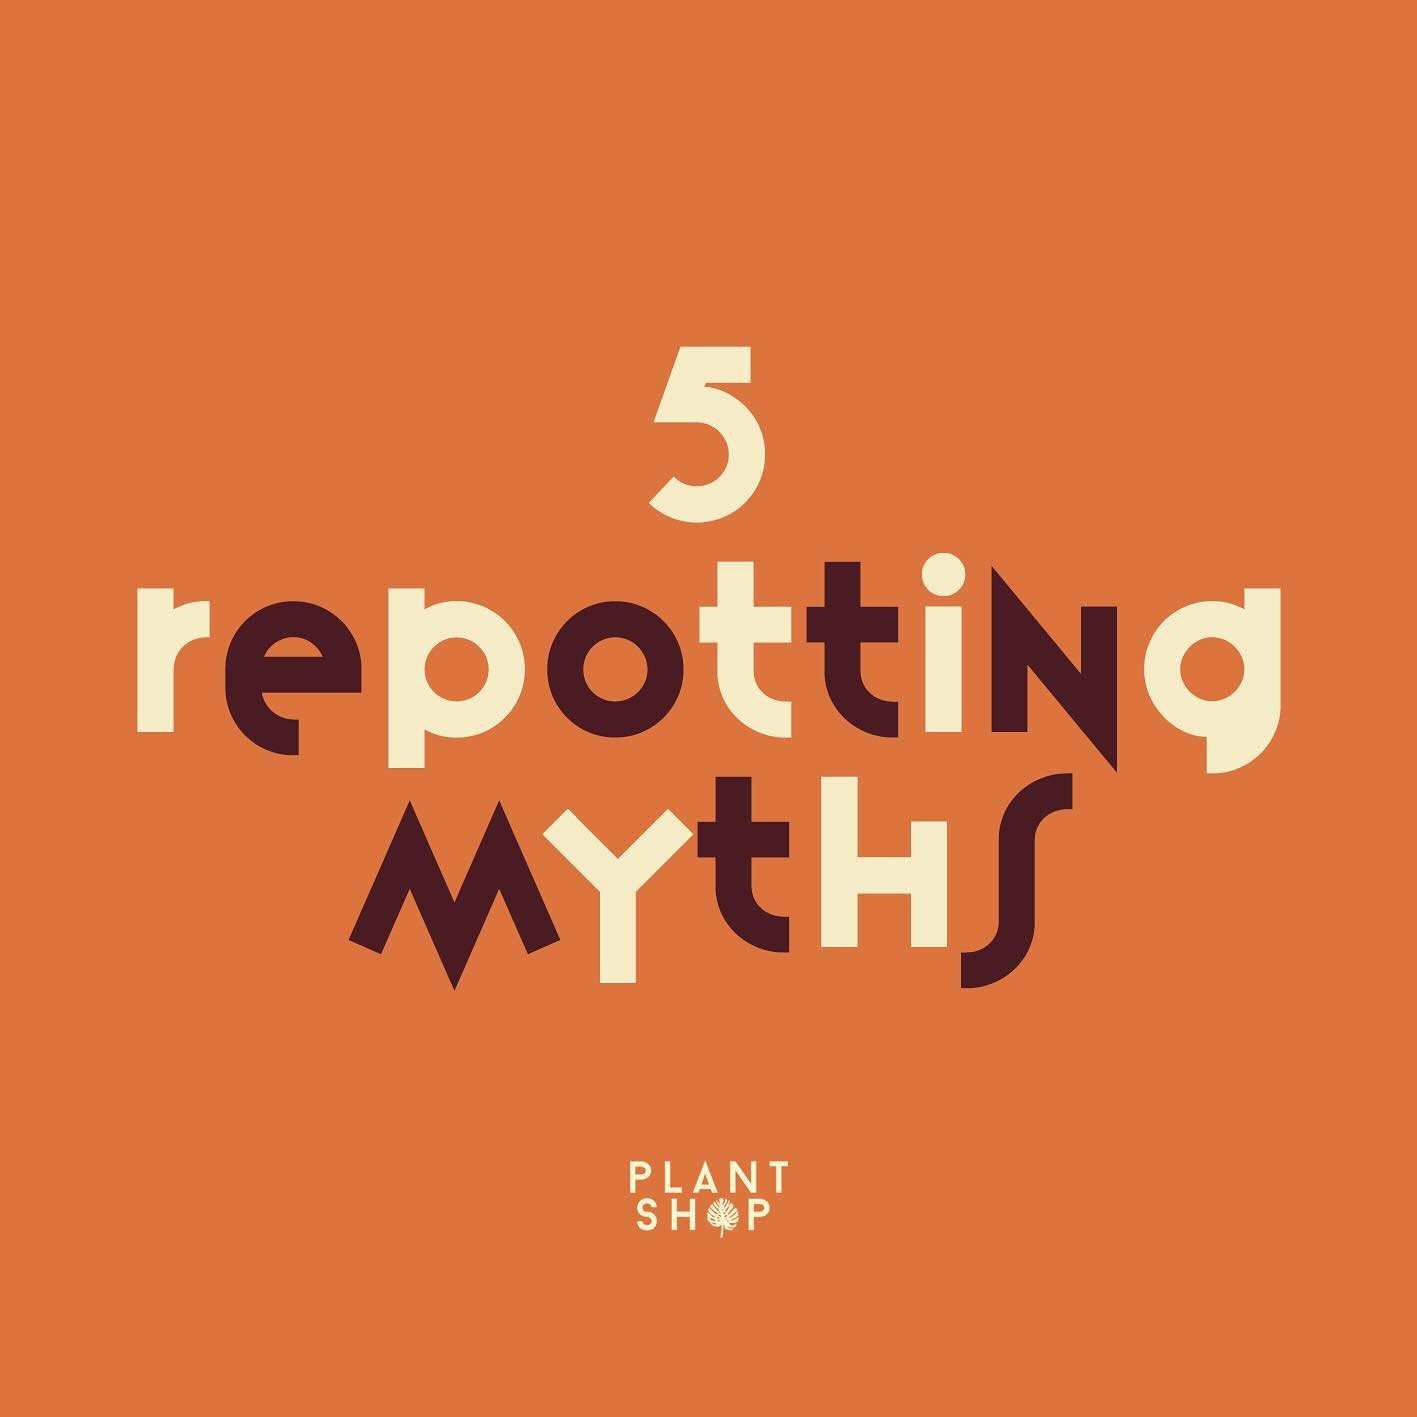 Good morning PLANT CLUB 🍃 Repotting season is now in full swing, since launching our repotting scheme we&rsquo;ve been inundated with questions so we&rsquo;ve put together this package 
for you&hellip;. 

The 5 most well-known repotting myths - DEBU